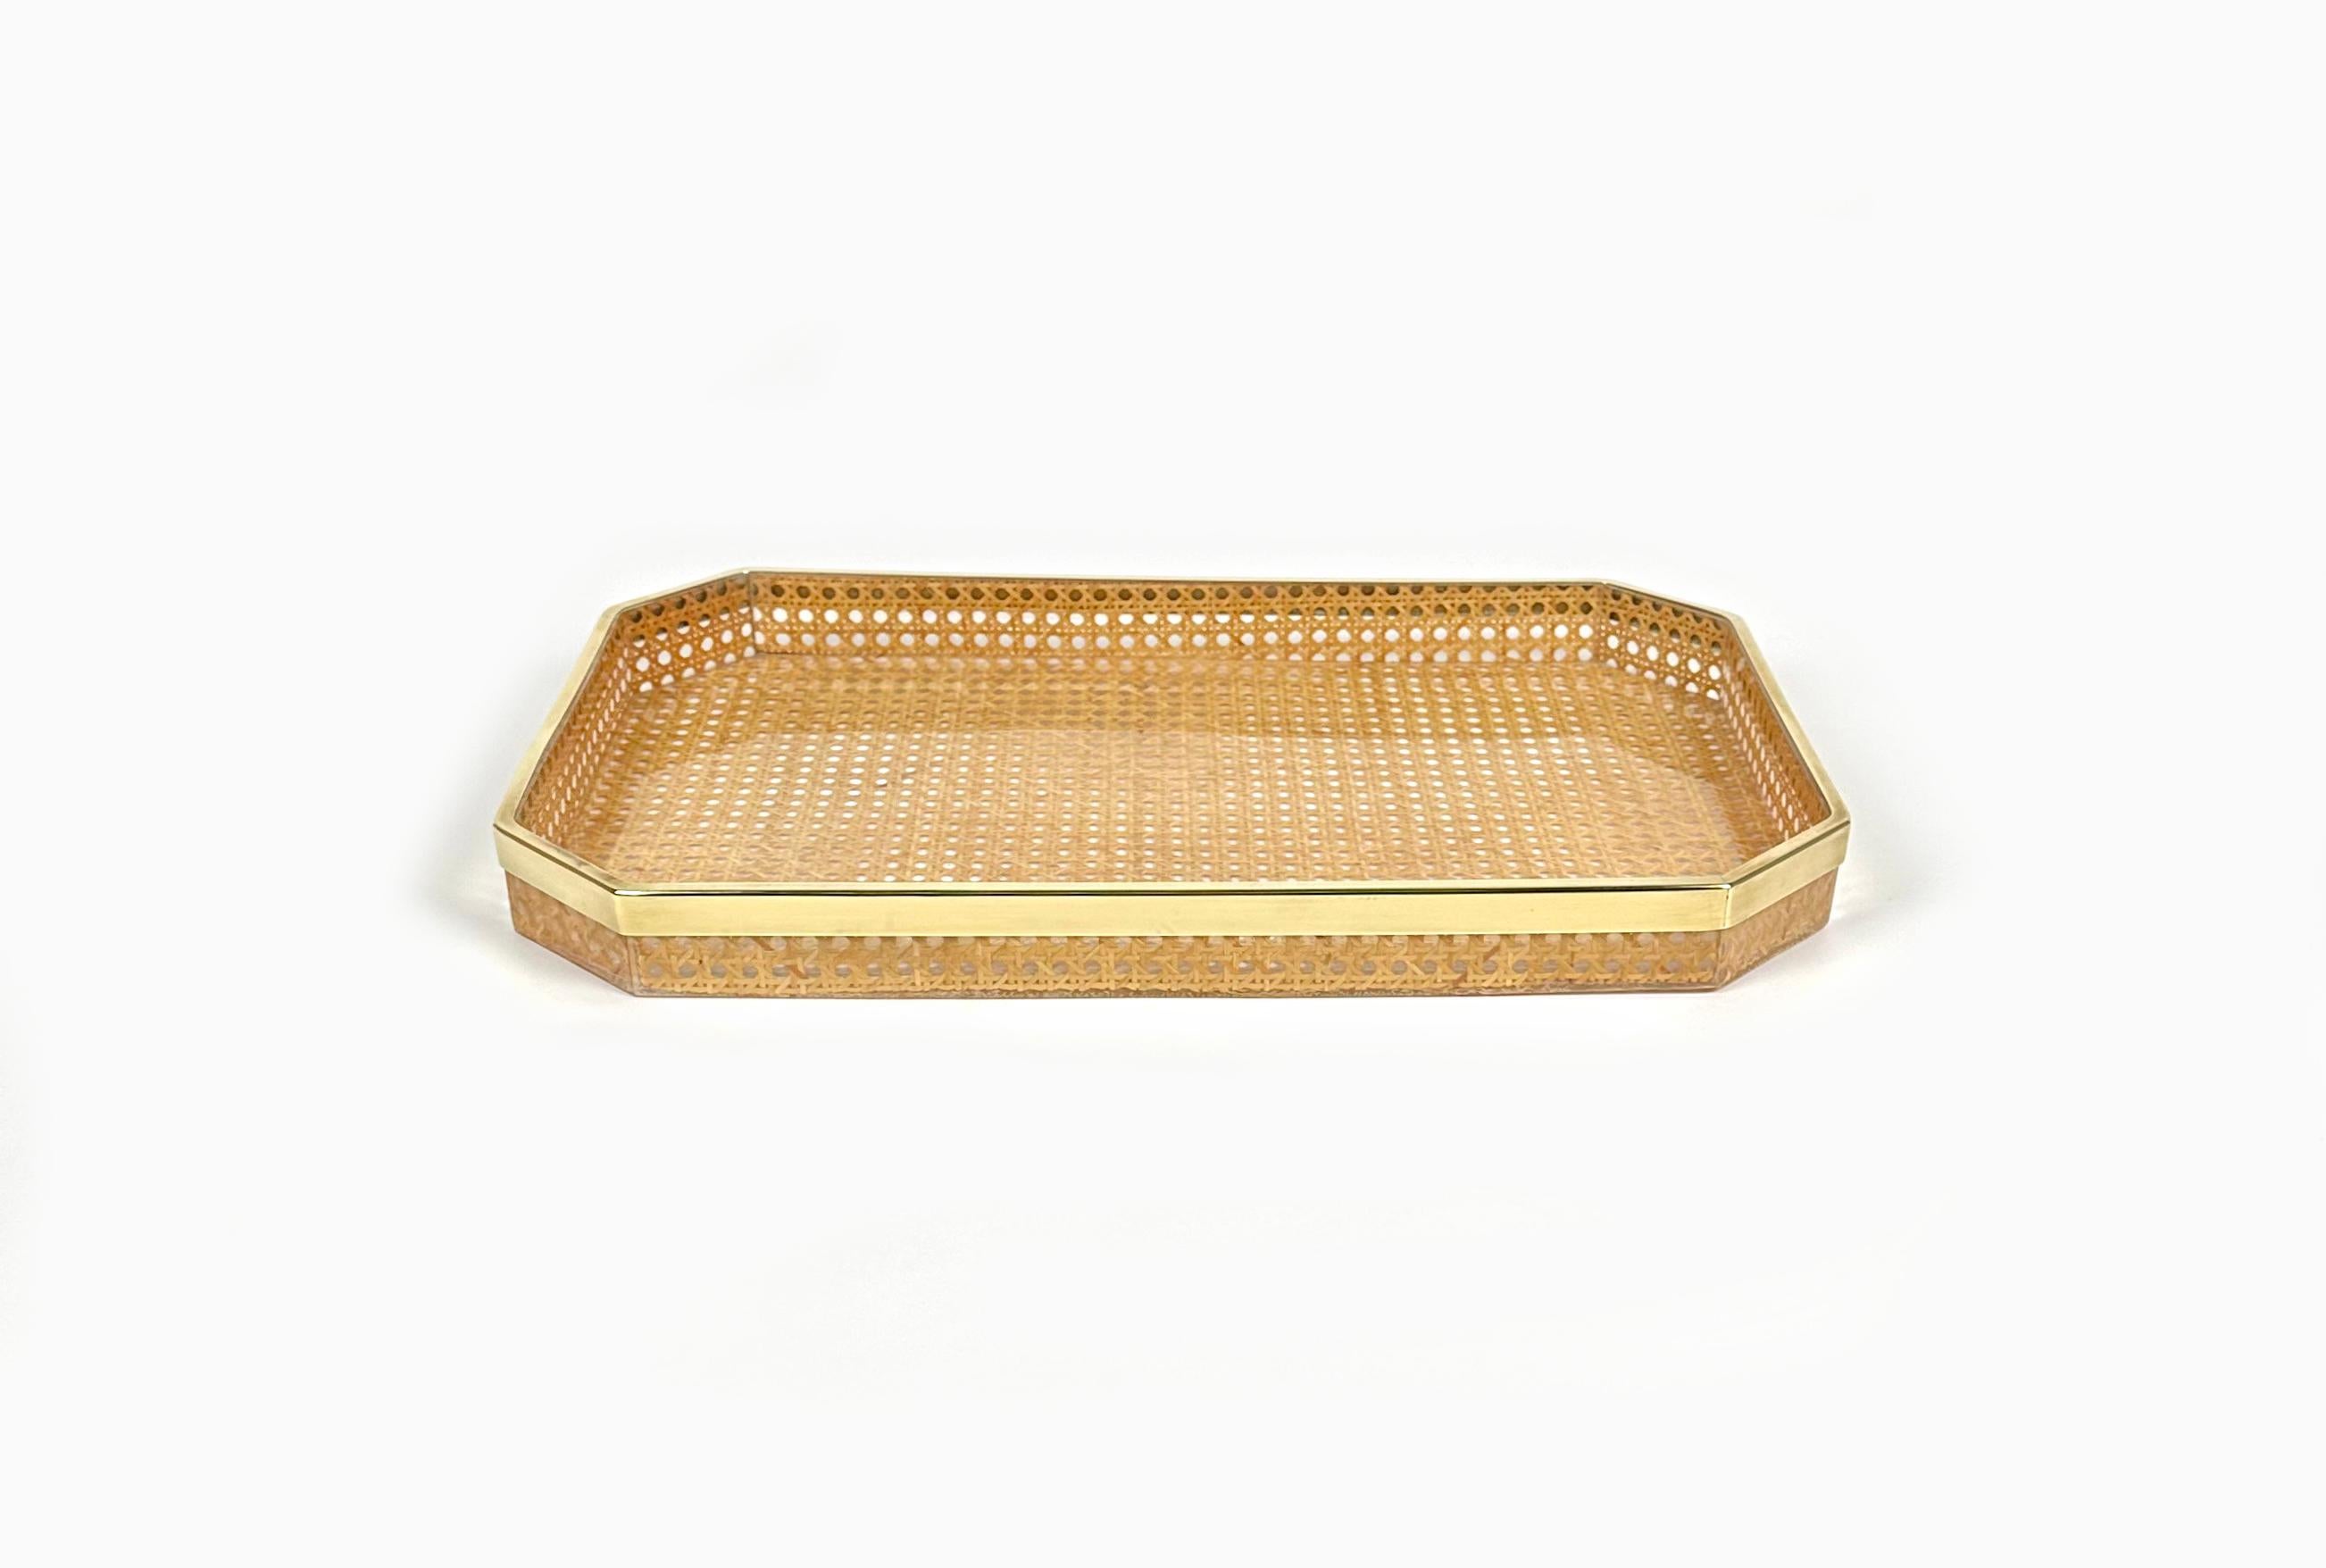 Mid-Century Modern Serving Tray in Lucite, Rattan and Brass Christian Dior Style, Italy, 1970s